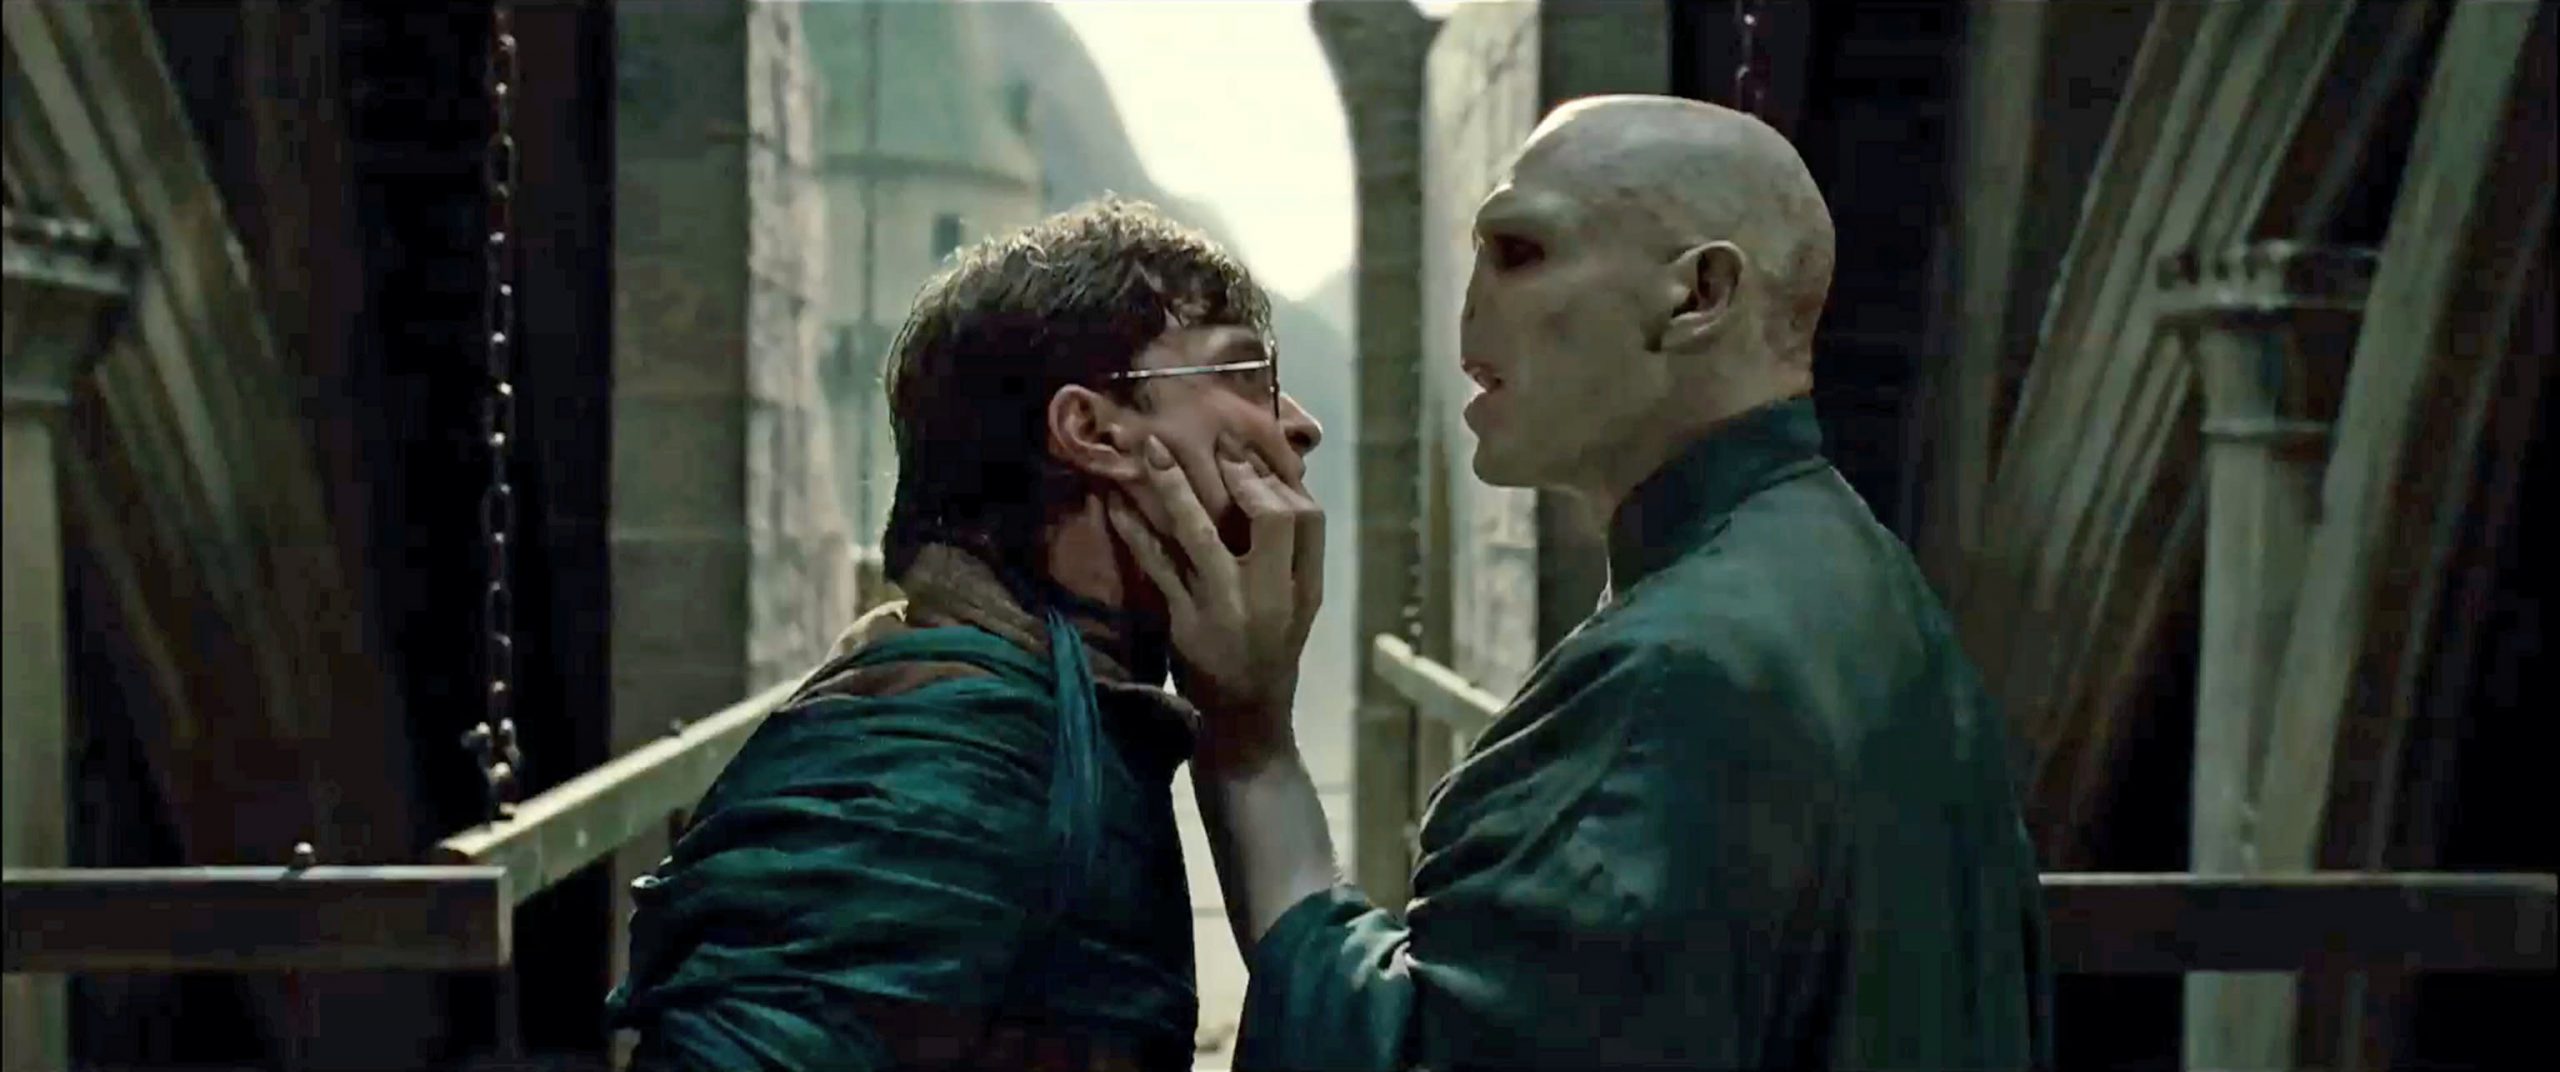 Voldemort WB F8 VoldemortSqueezingHarrysFace Still 080615 Land scaled